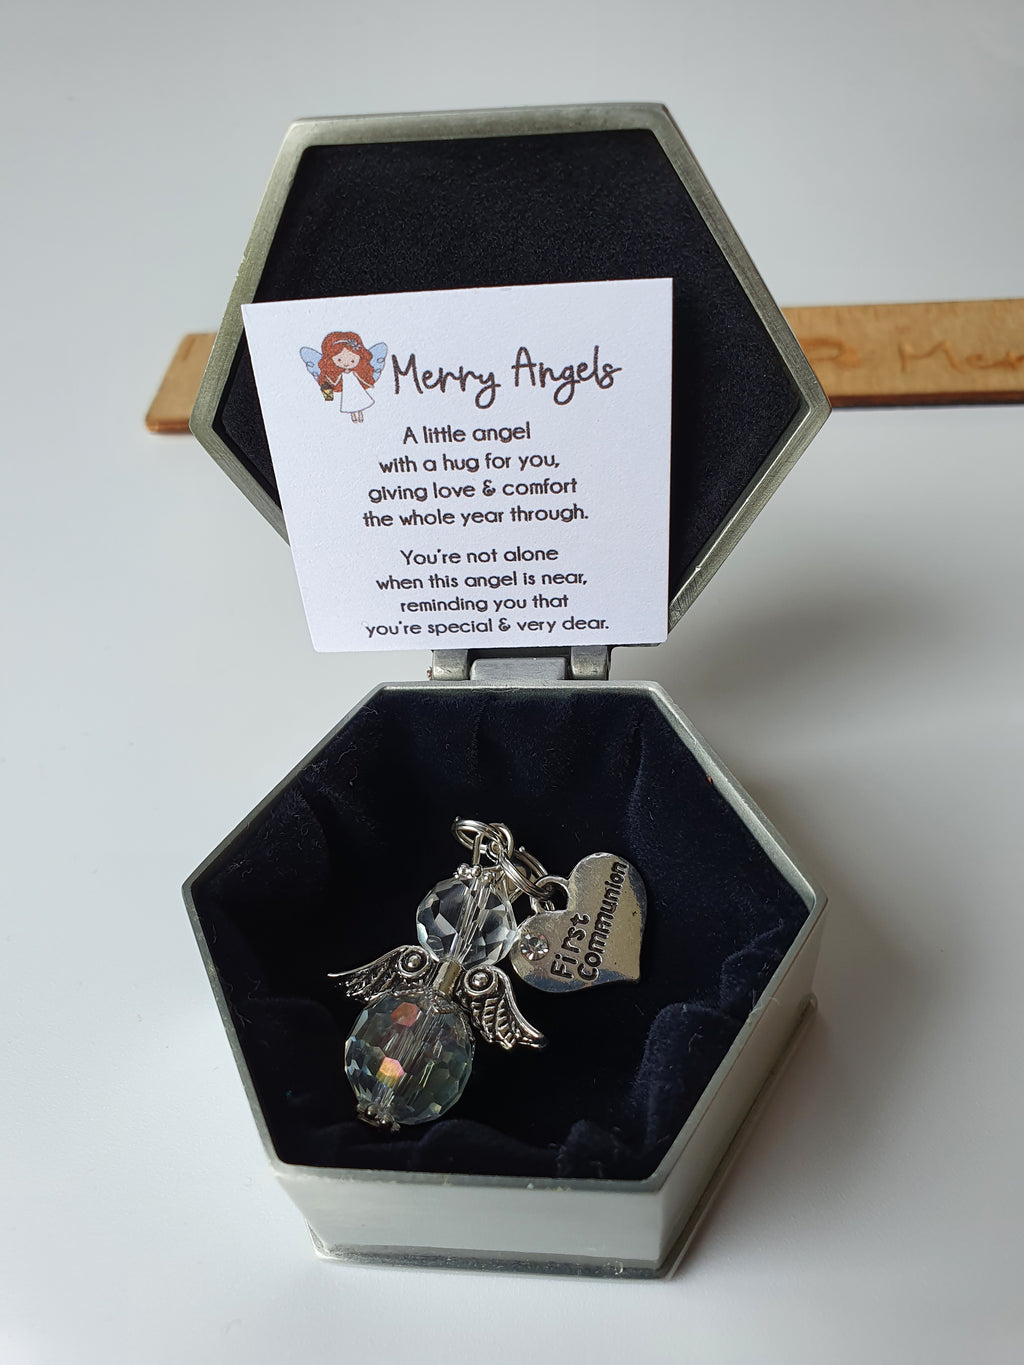 This picture shows a small angel hug with a silver first communion charm attached, There is a lovely little poem also and a beautiful silver box